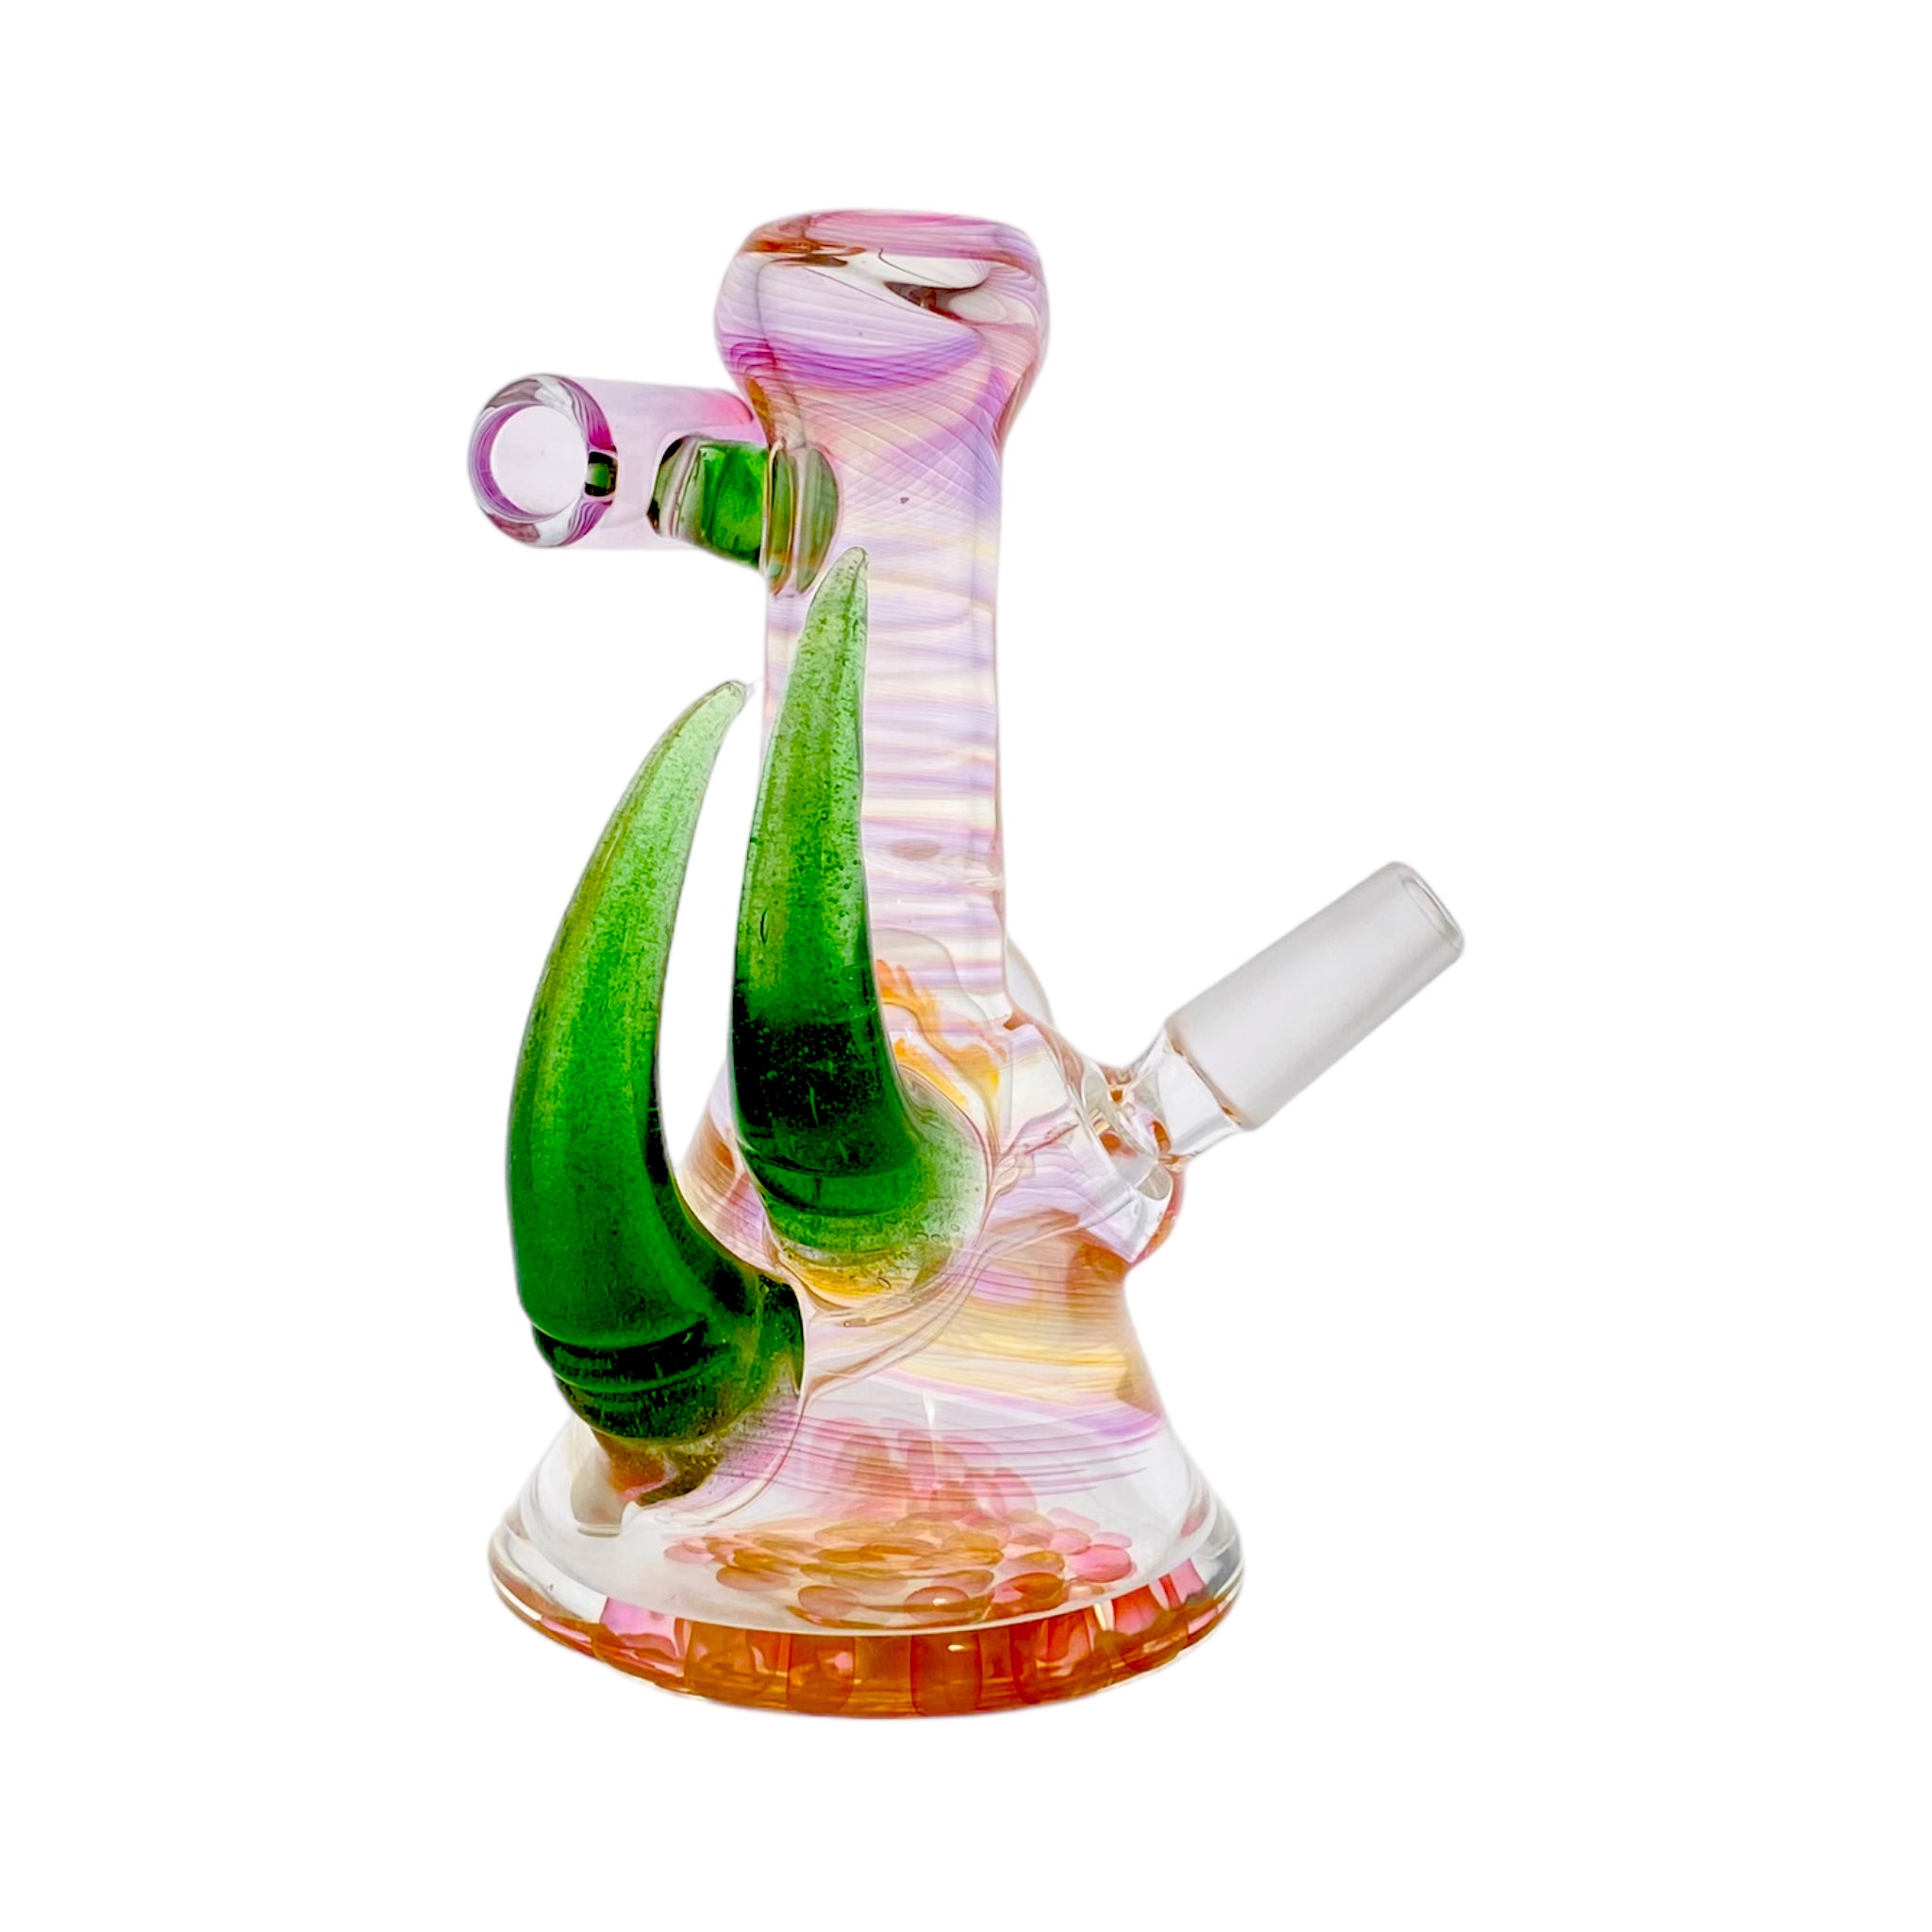 10mm Pendant Dab Rig With Fuming Twist And Green Horns